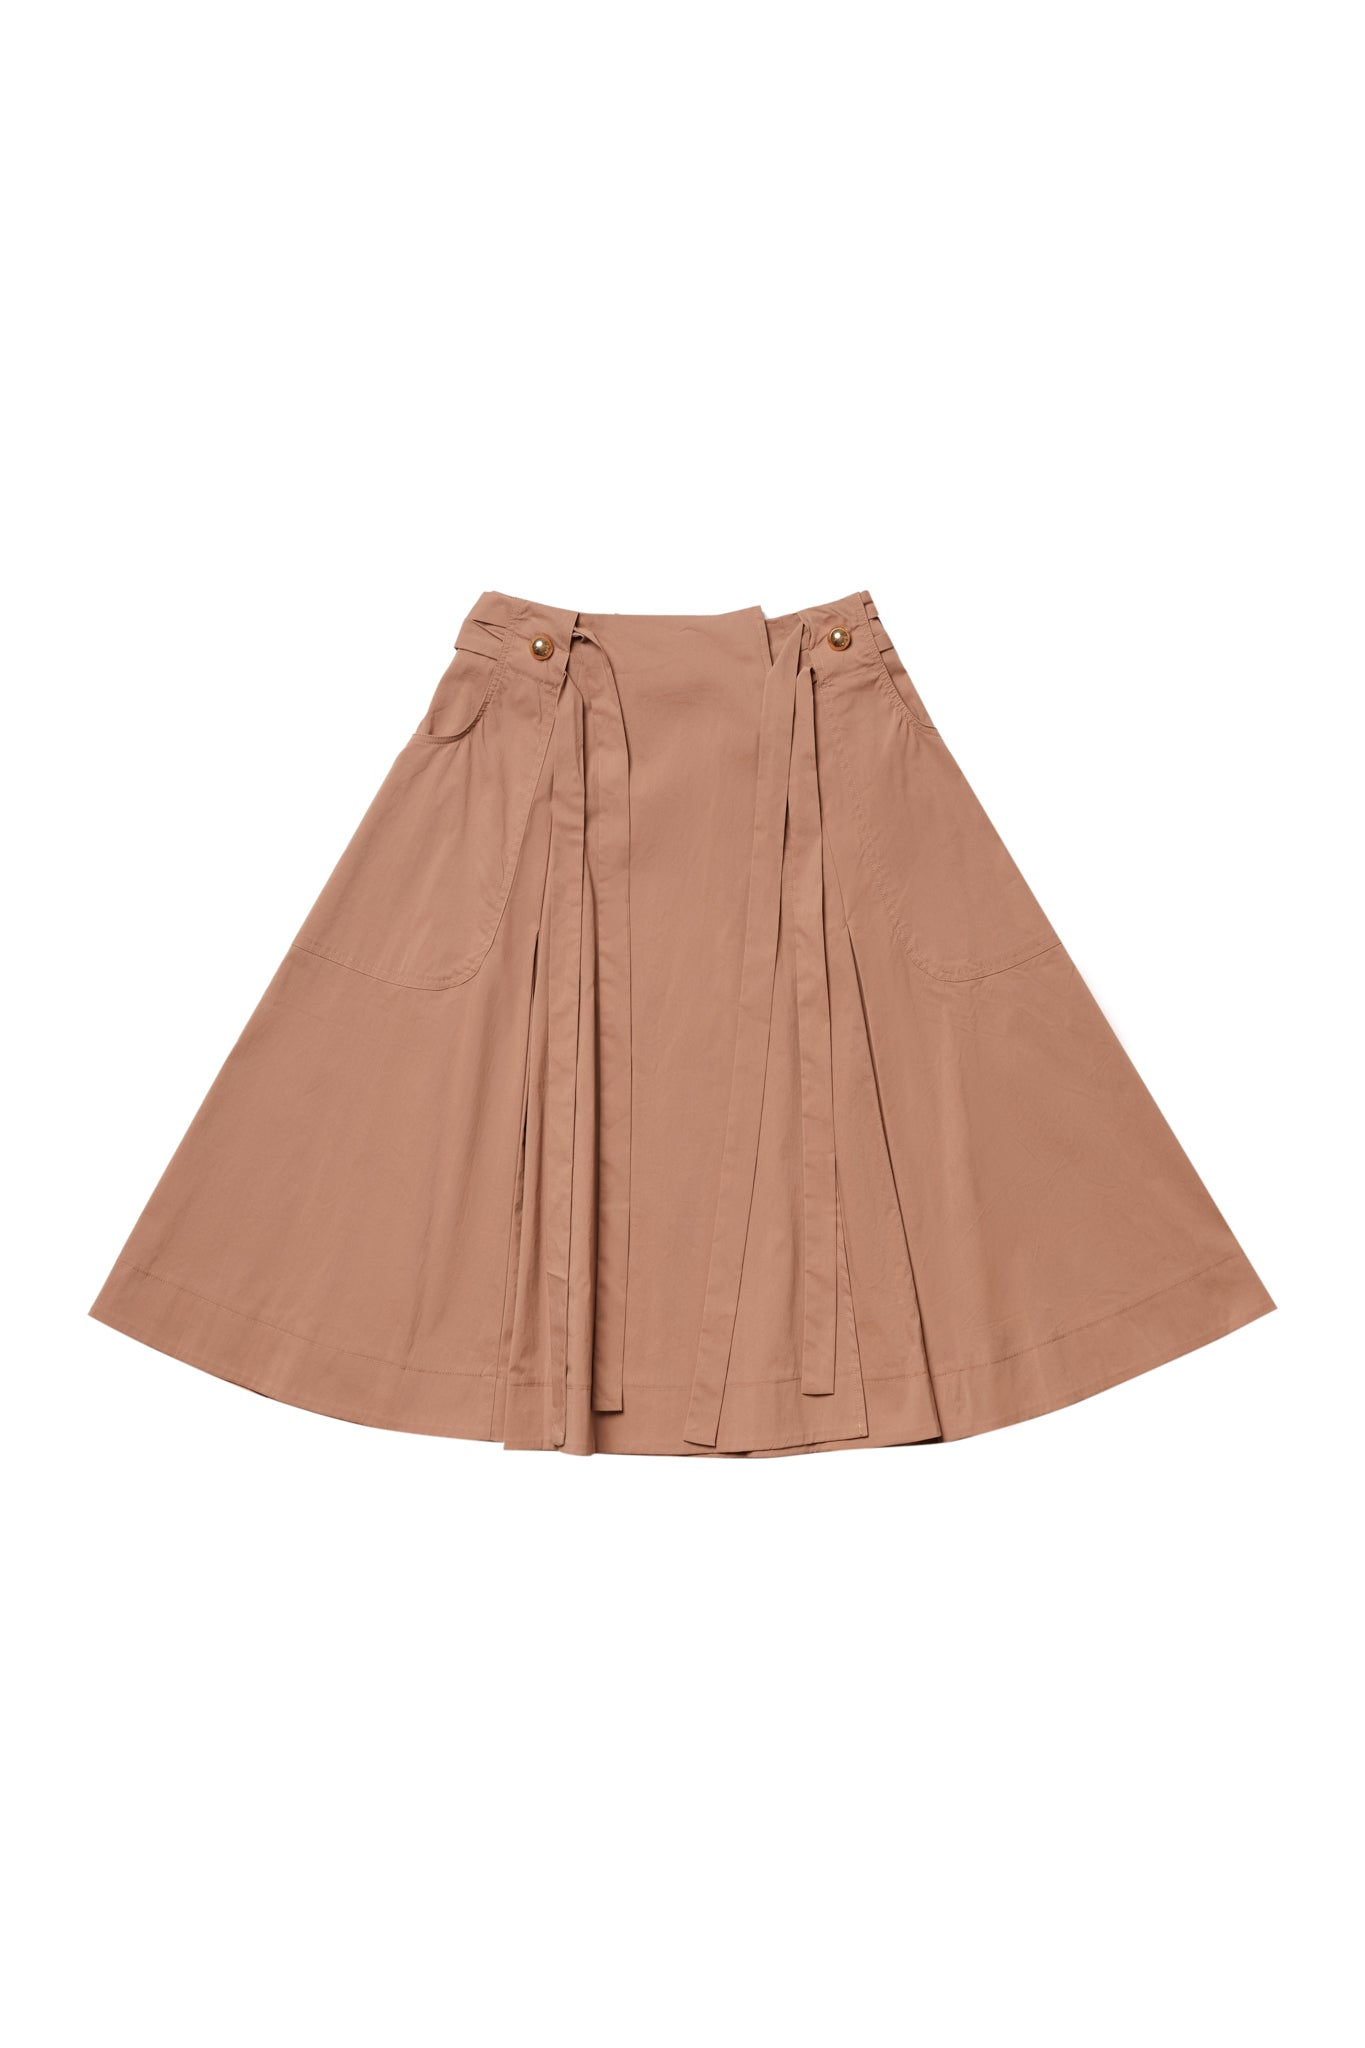 Mocha Skirt with Buttons #1660 FINAL SALE